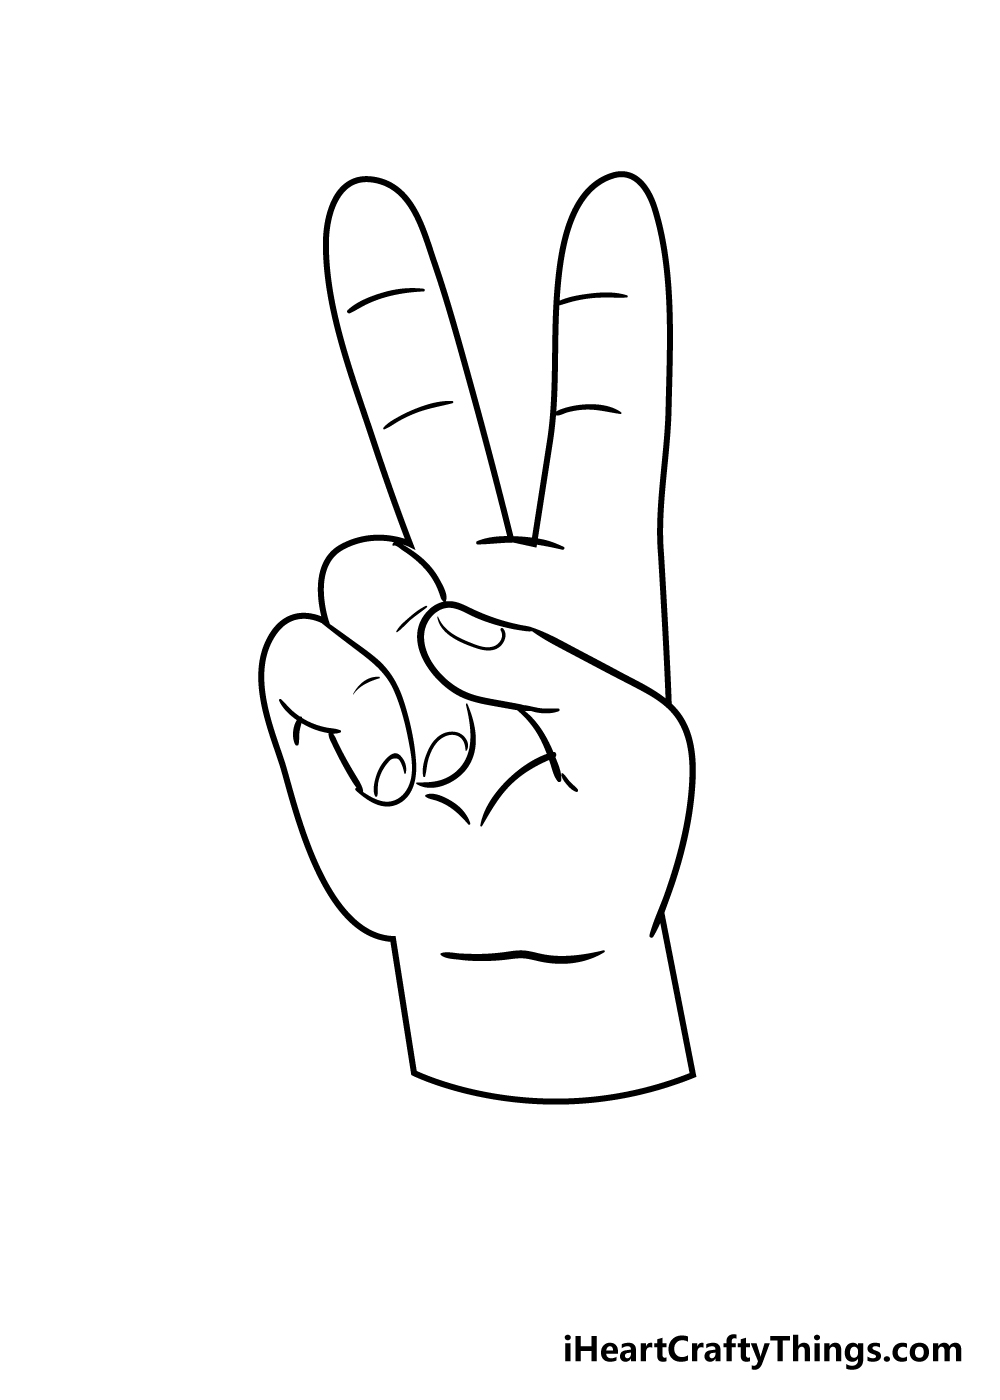 peace sign drawing step 5